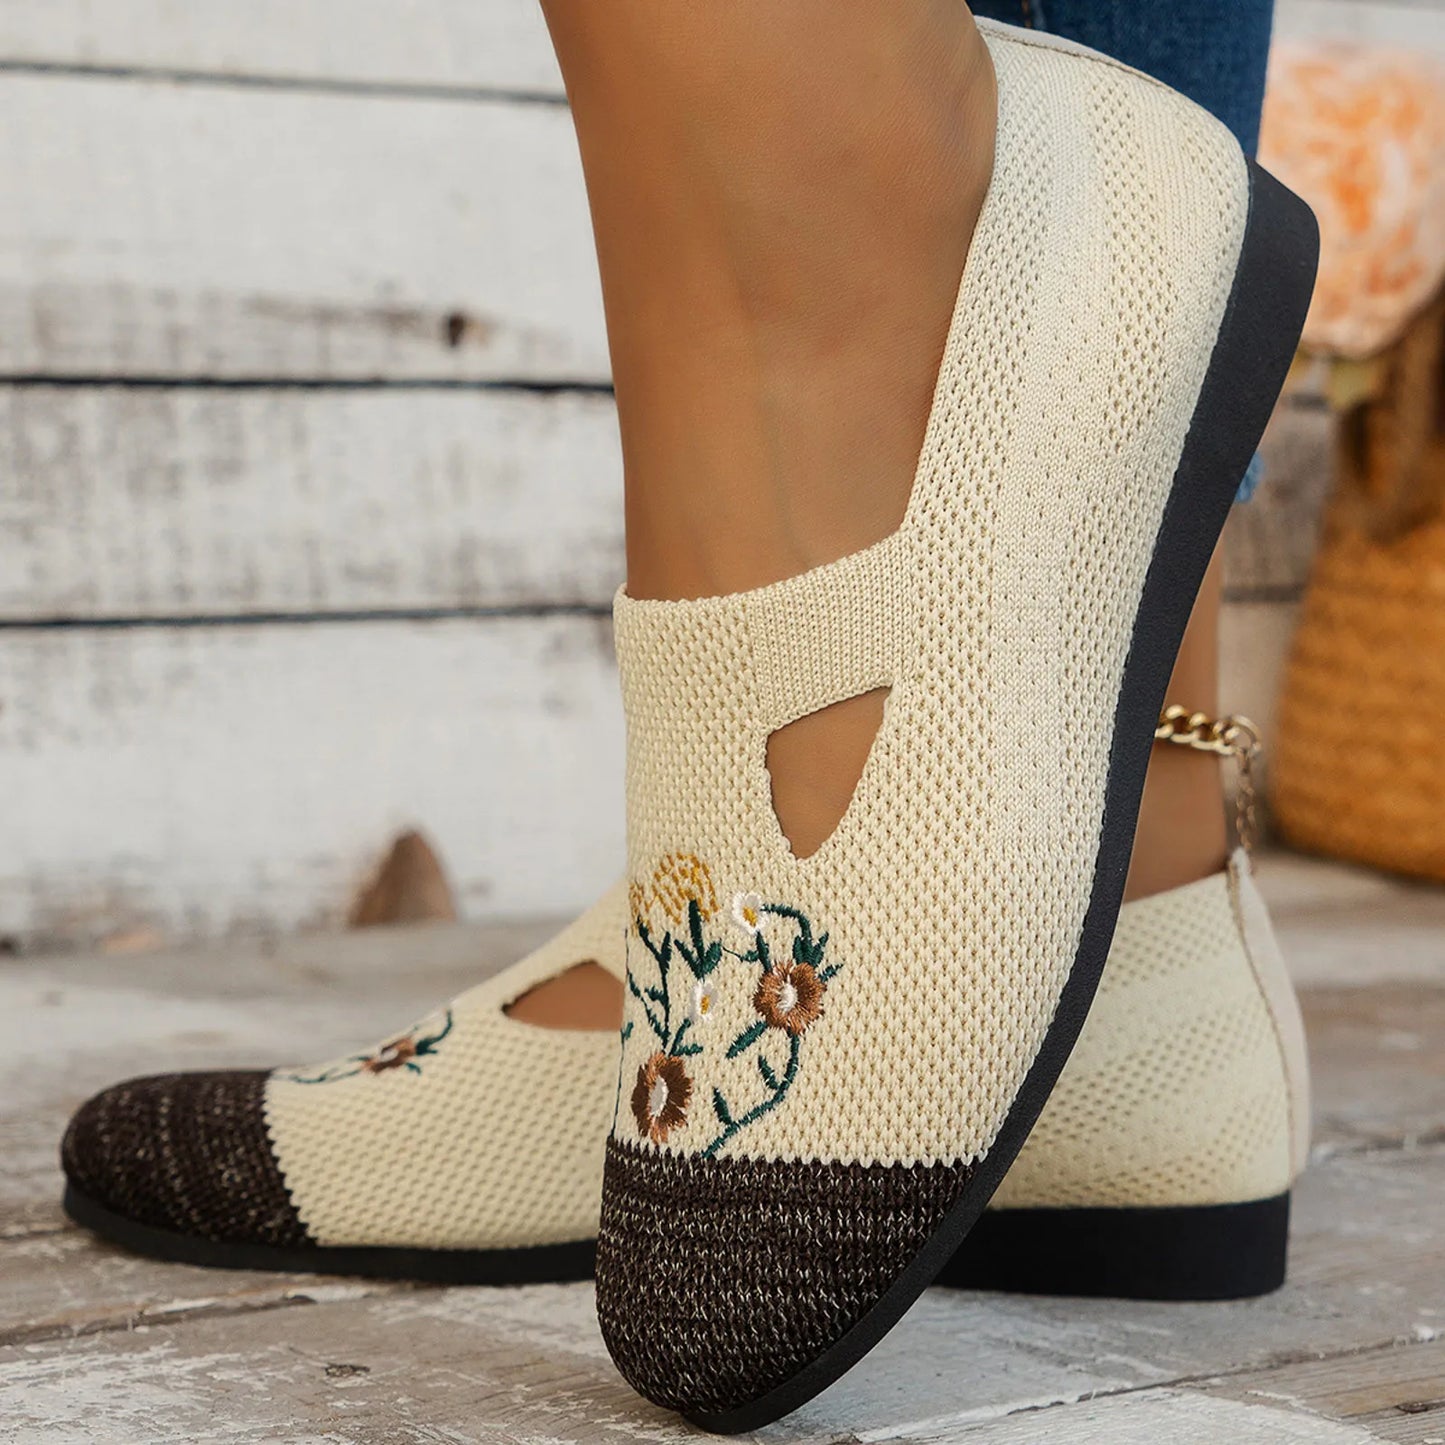 Ladies Mesh Knitted Shoes Fashion/Breathable Flower Embroidery Flat Bottom Casual